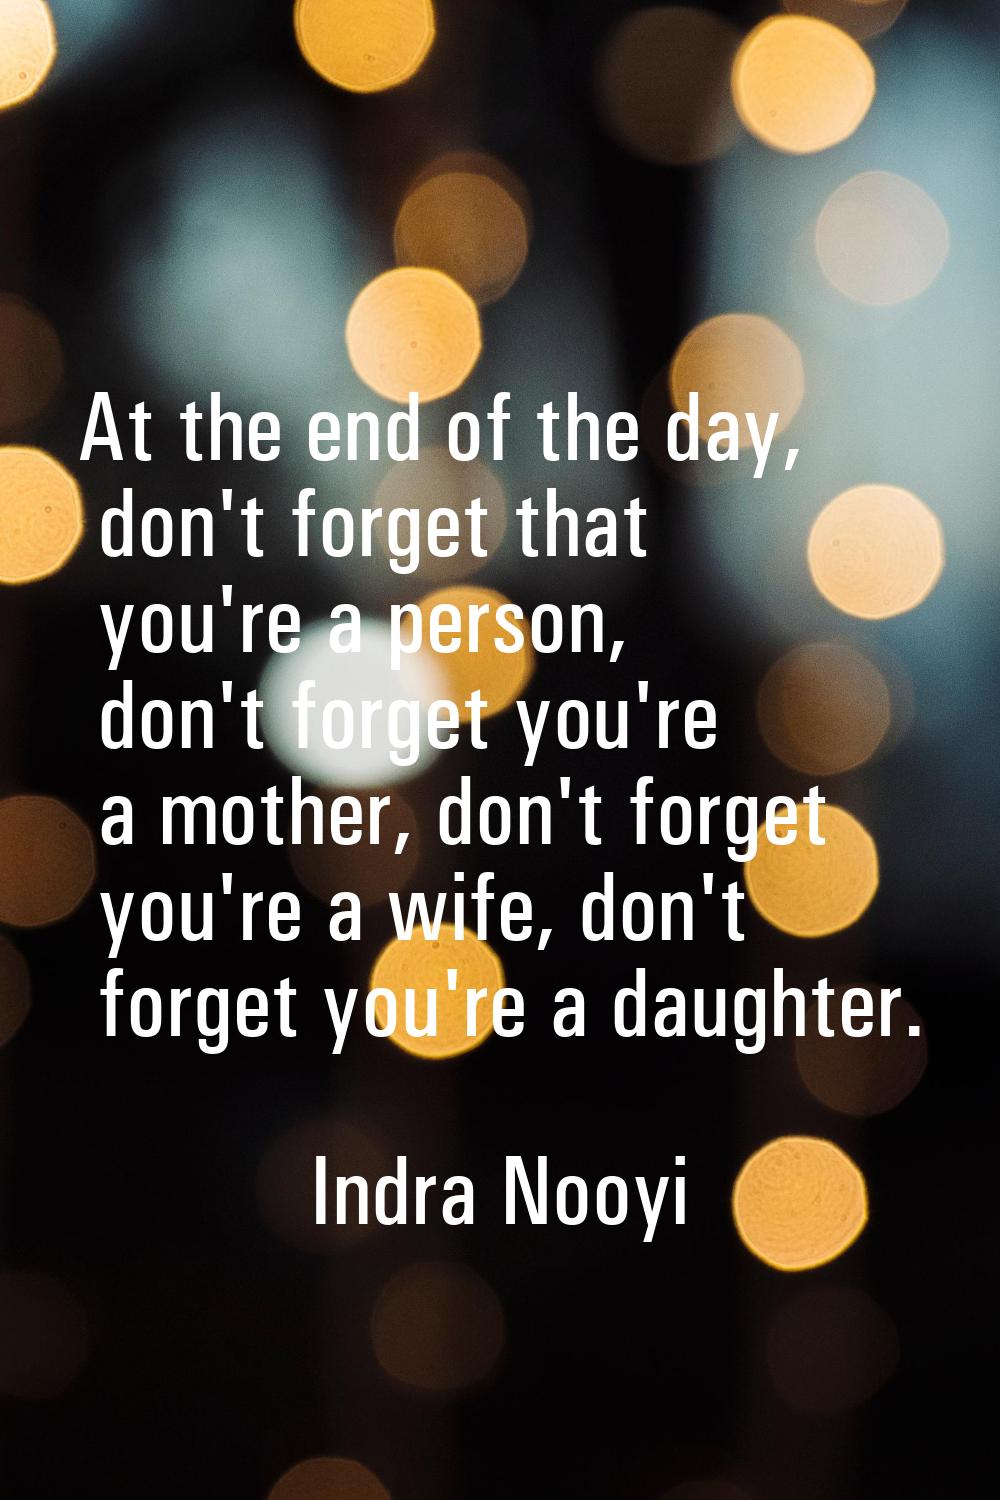 At the end of the day, don't forget that you're a person, don't forget you're a mother, don't forge